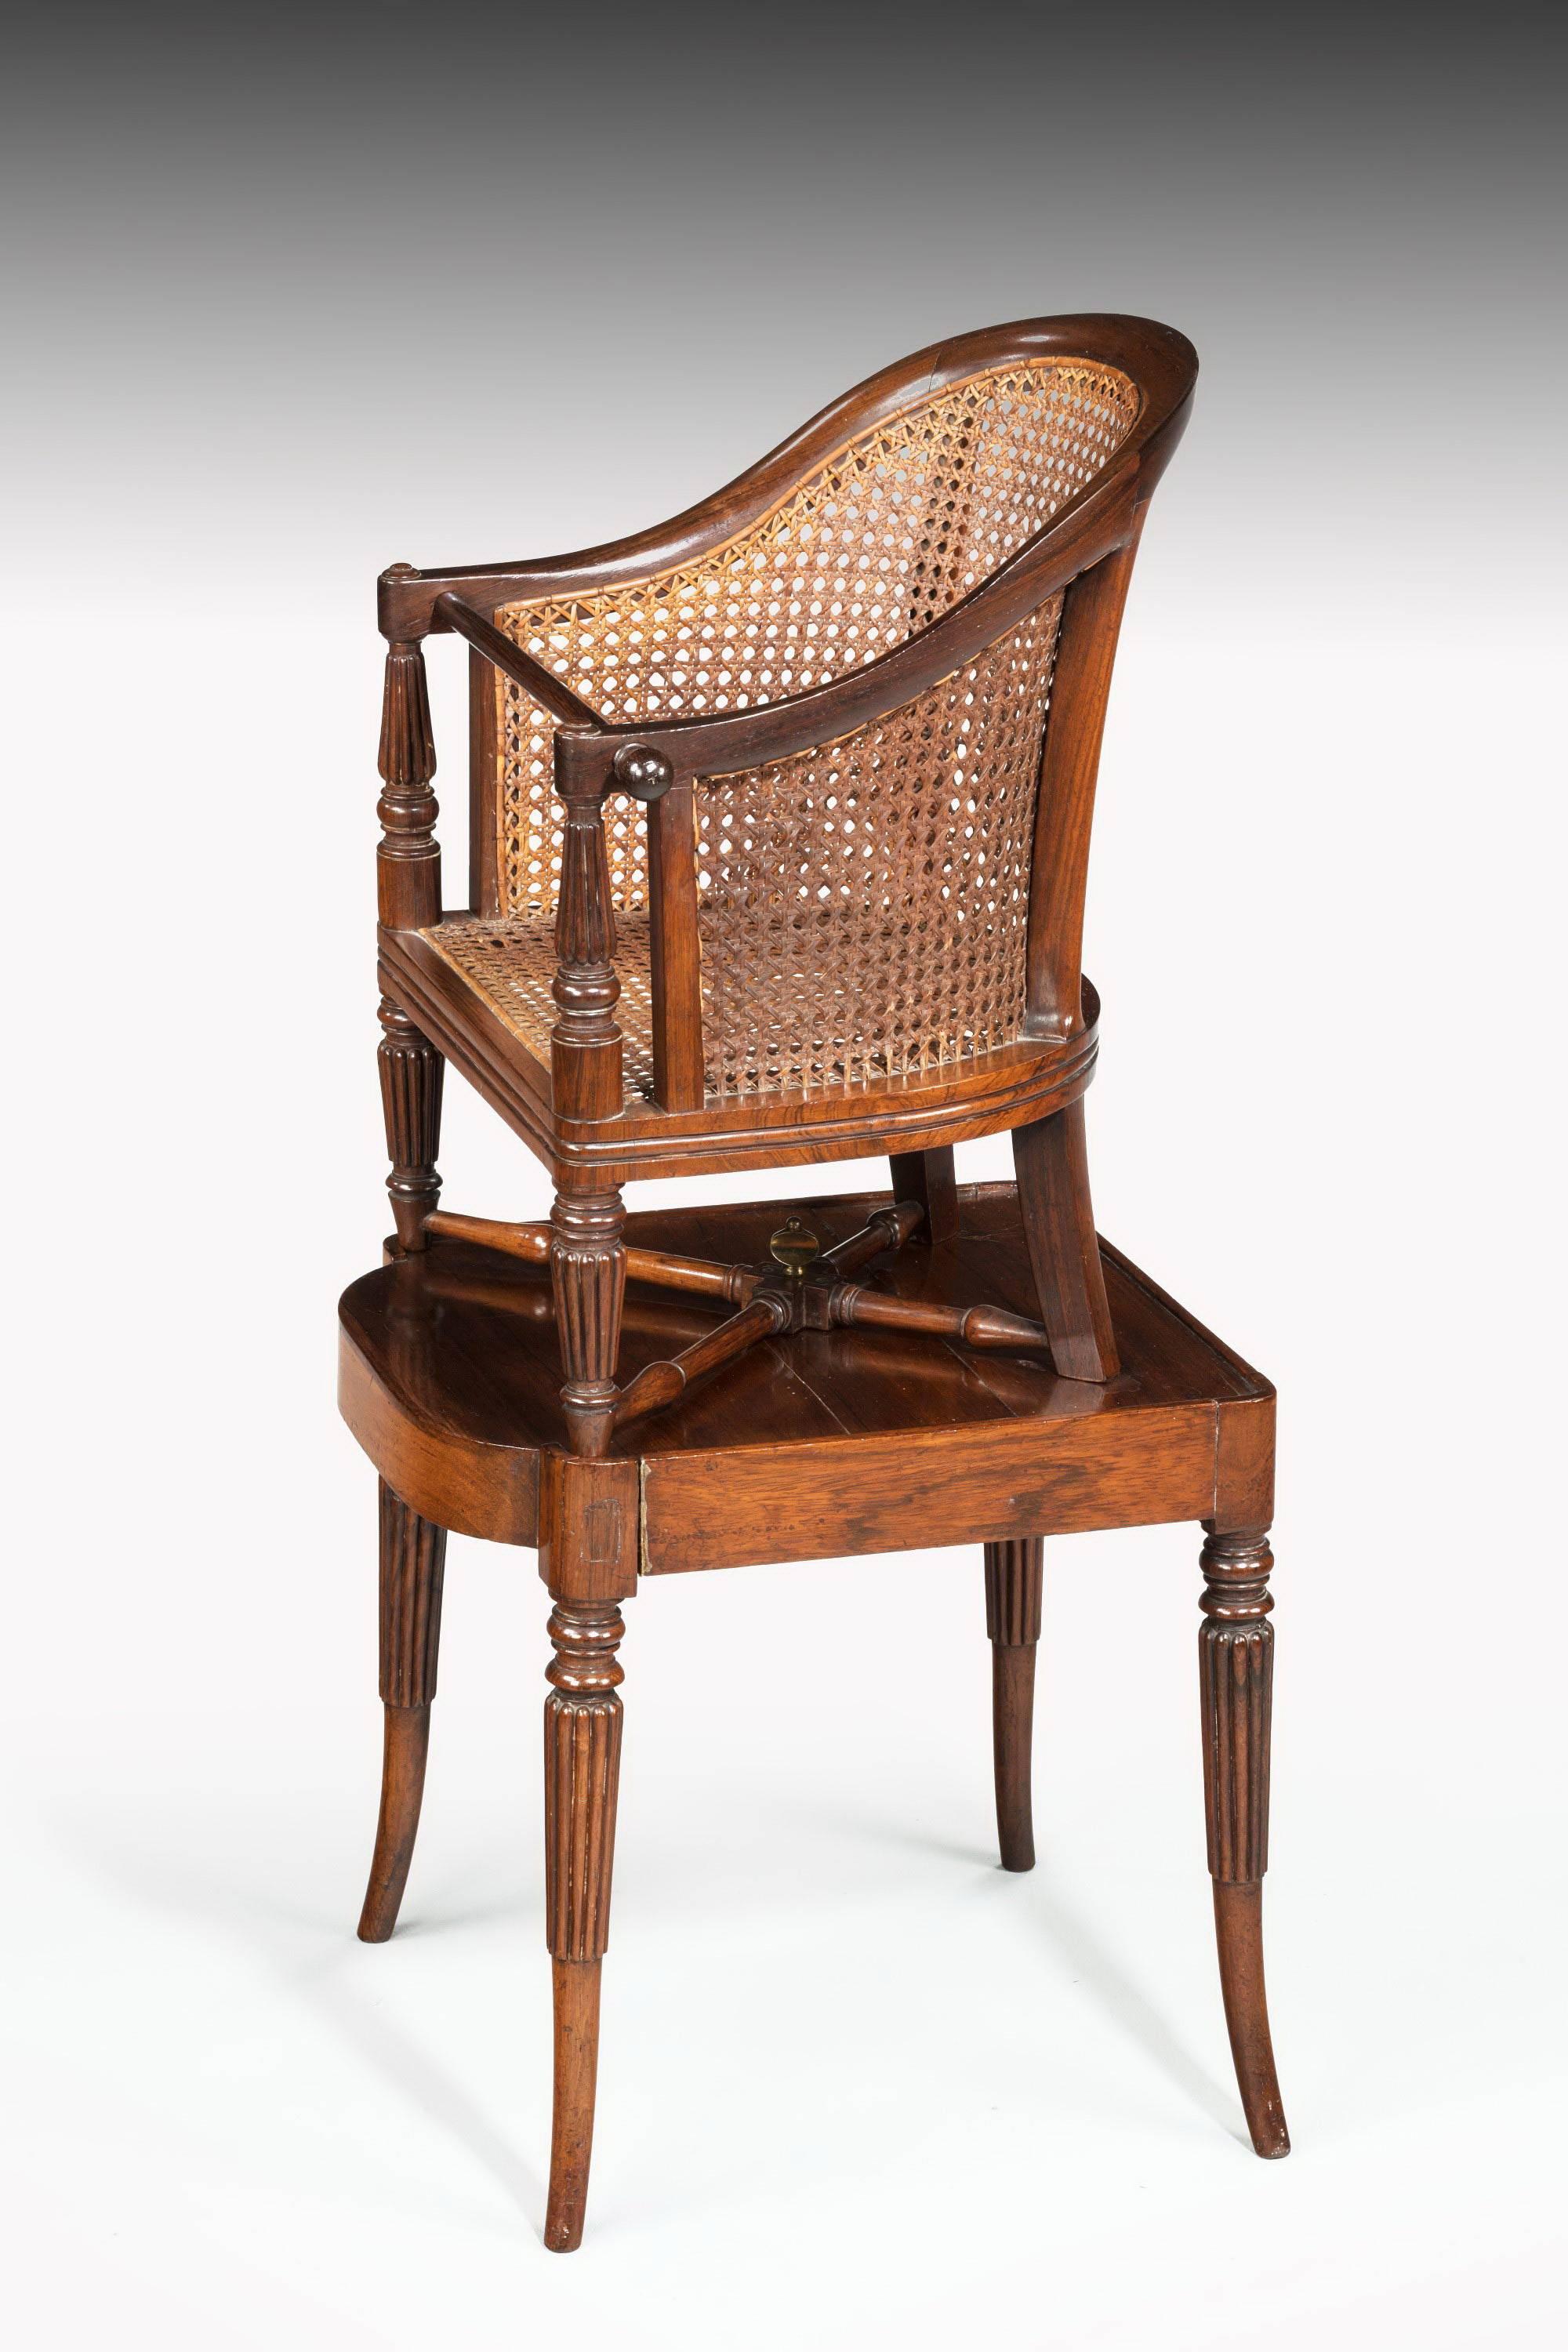 A very good example of a Regency period child’s chair on stand. Minor damage to the cane work. Very best quality with beautifully reeded uprights. Original condition. 

Measure: Seat height-23 inches.